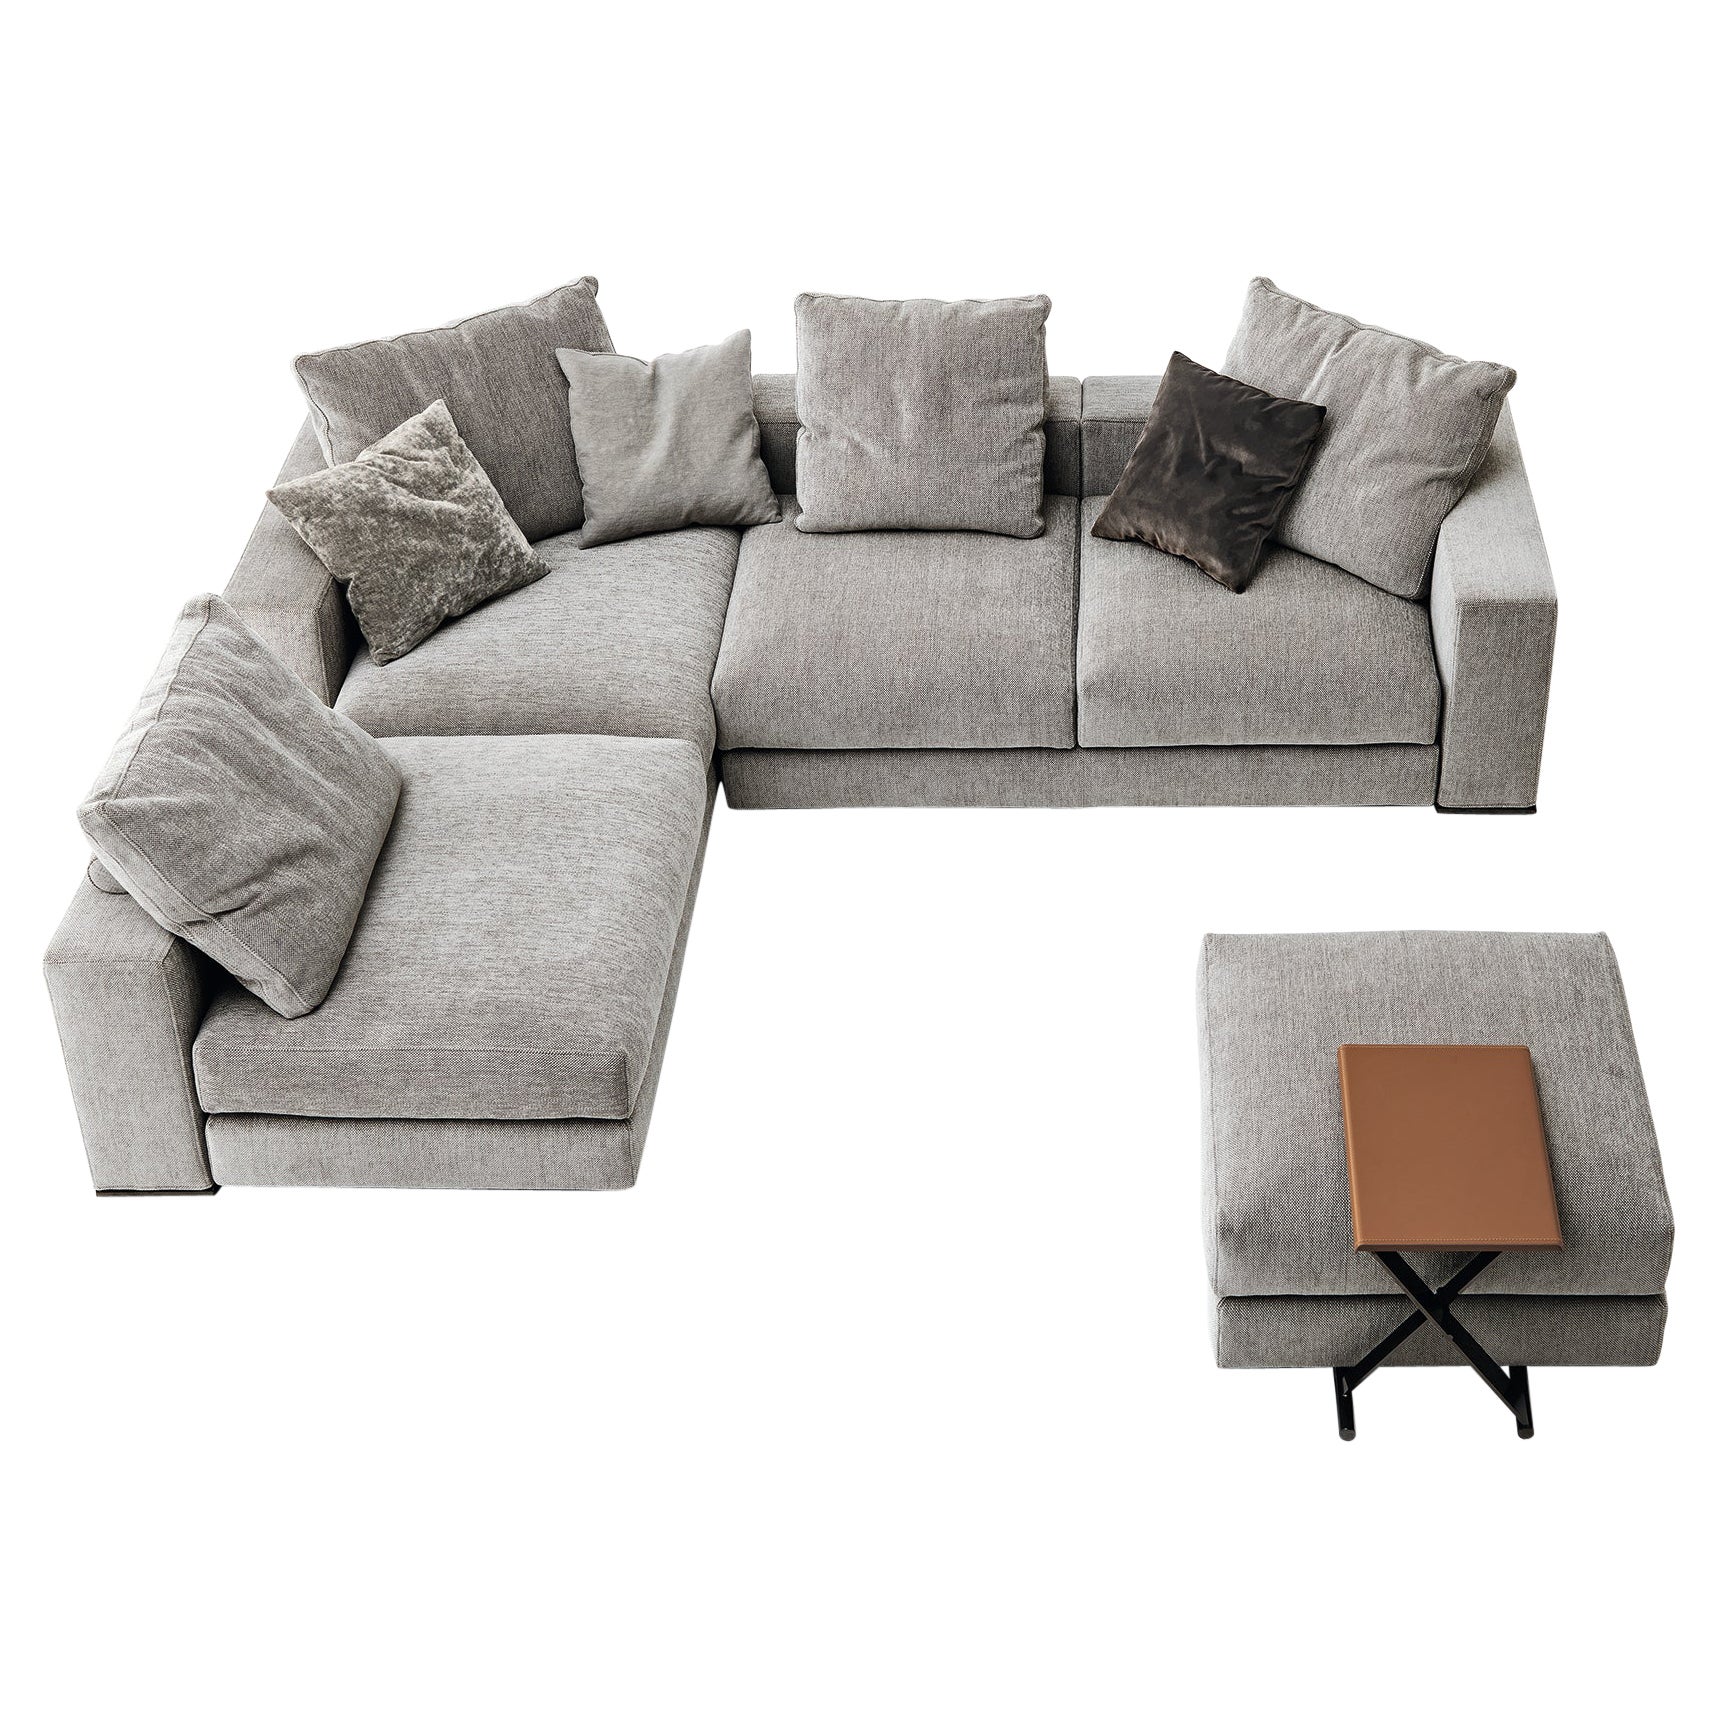 Ananta Class 23 Large Sectional Sofa in Lusso Upholstery by Sergio Bicego For Sale